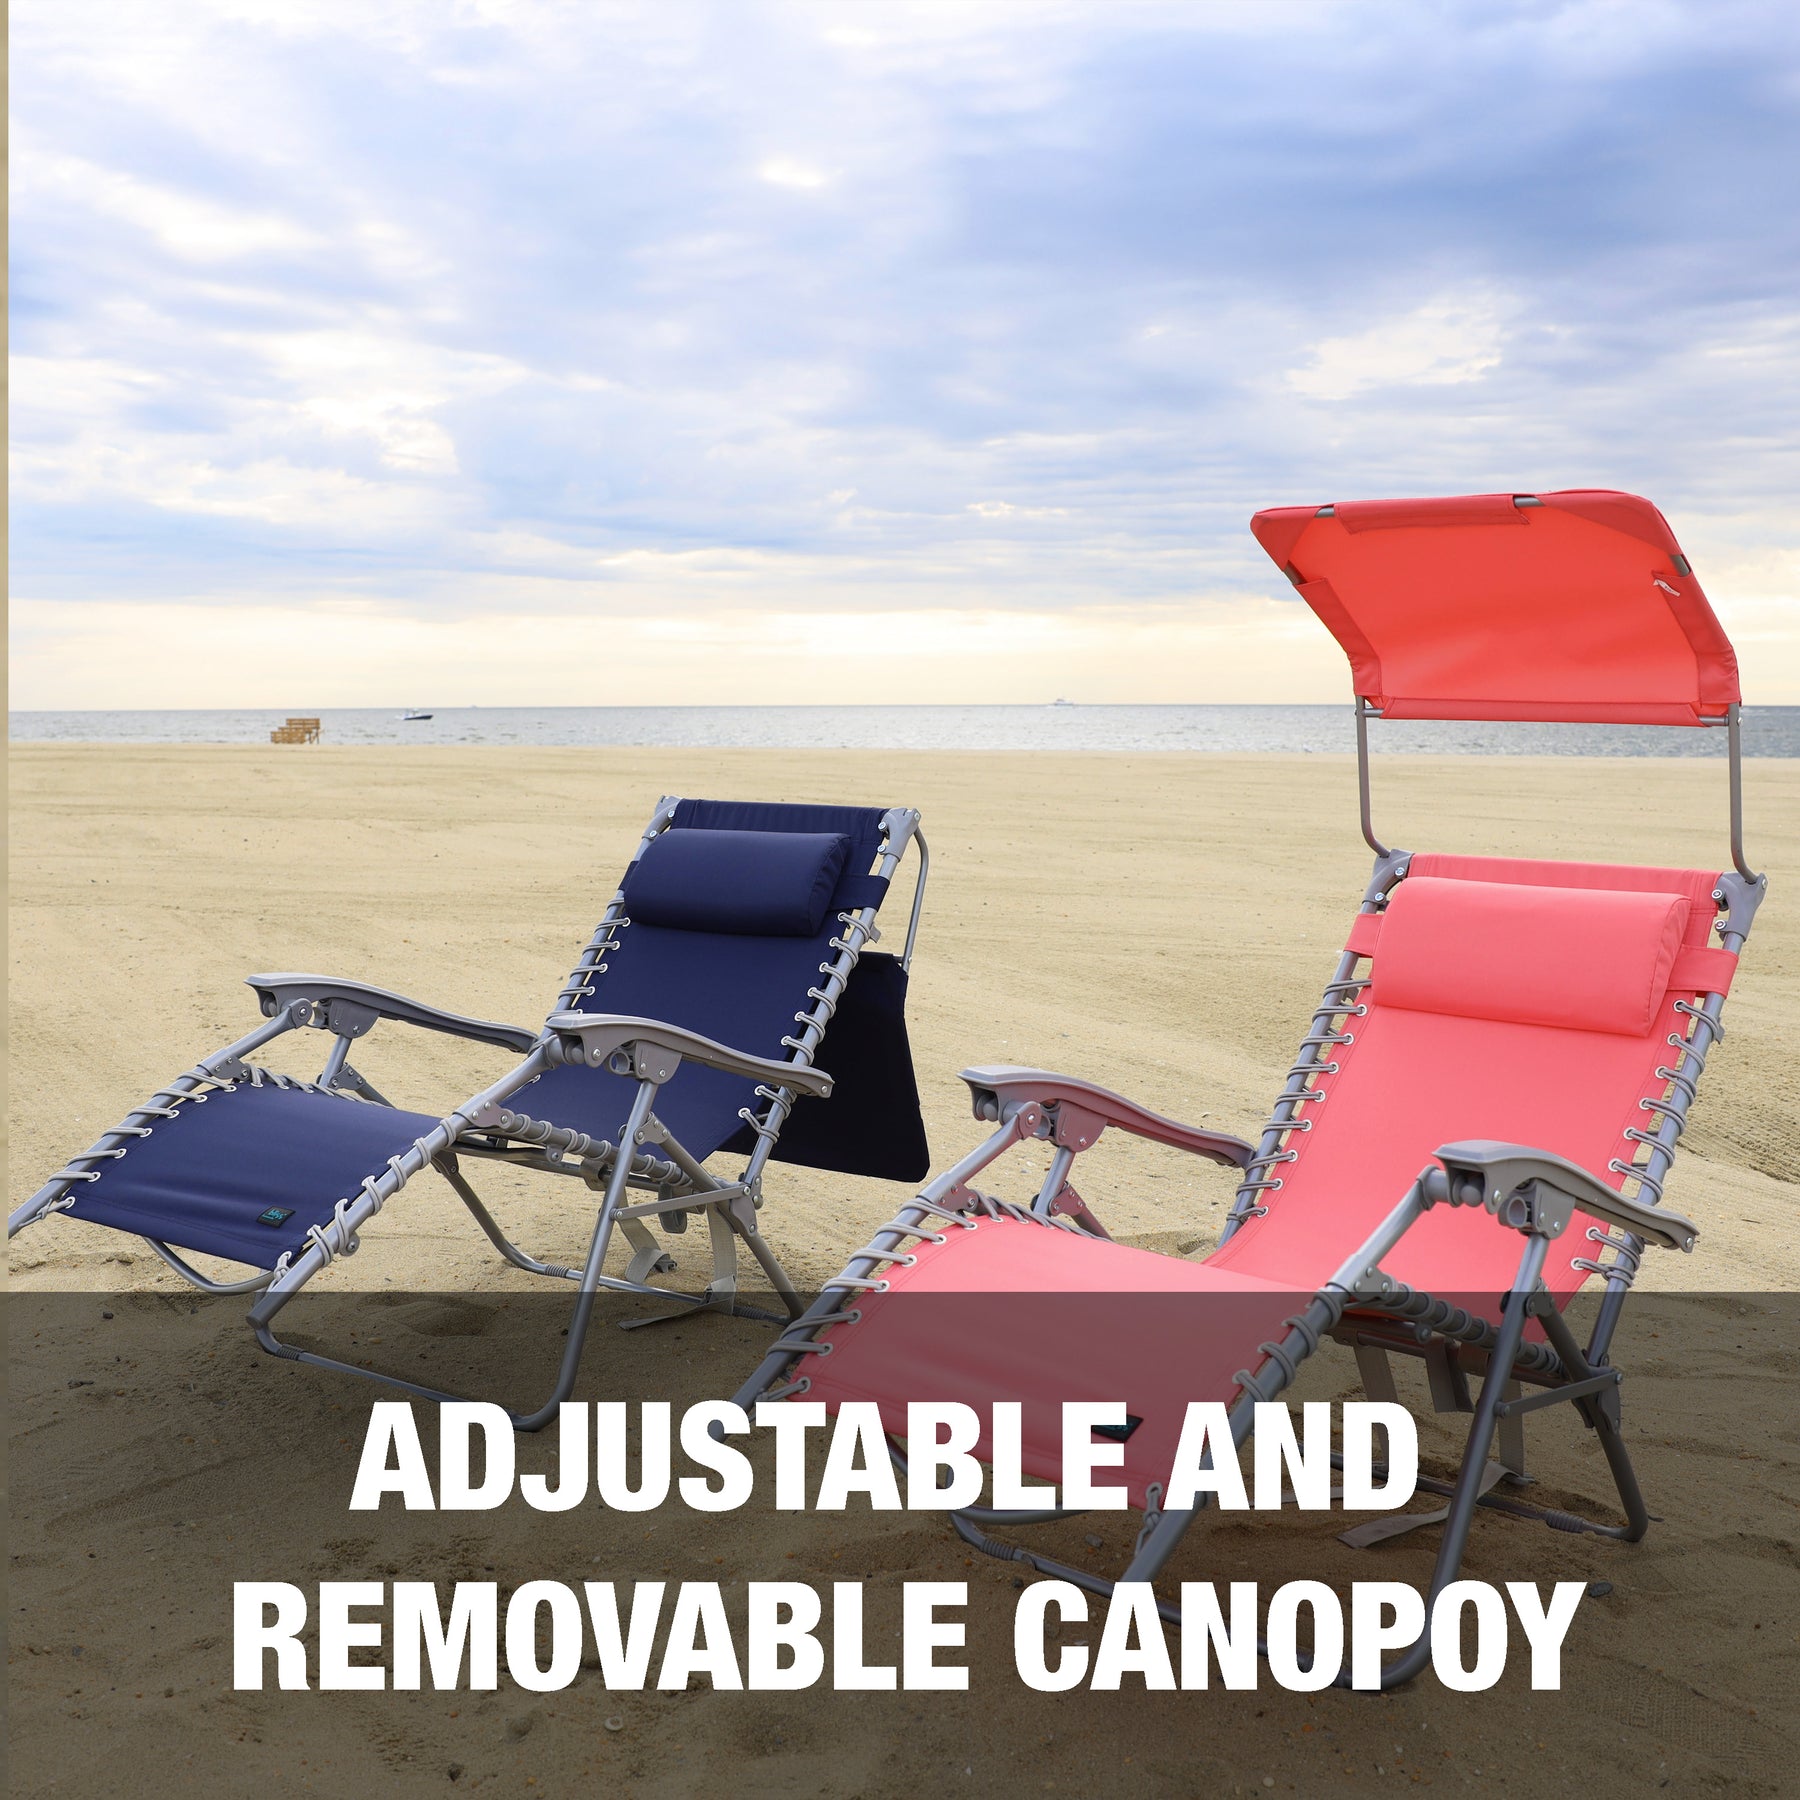 Adjustable and removable canopy.